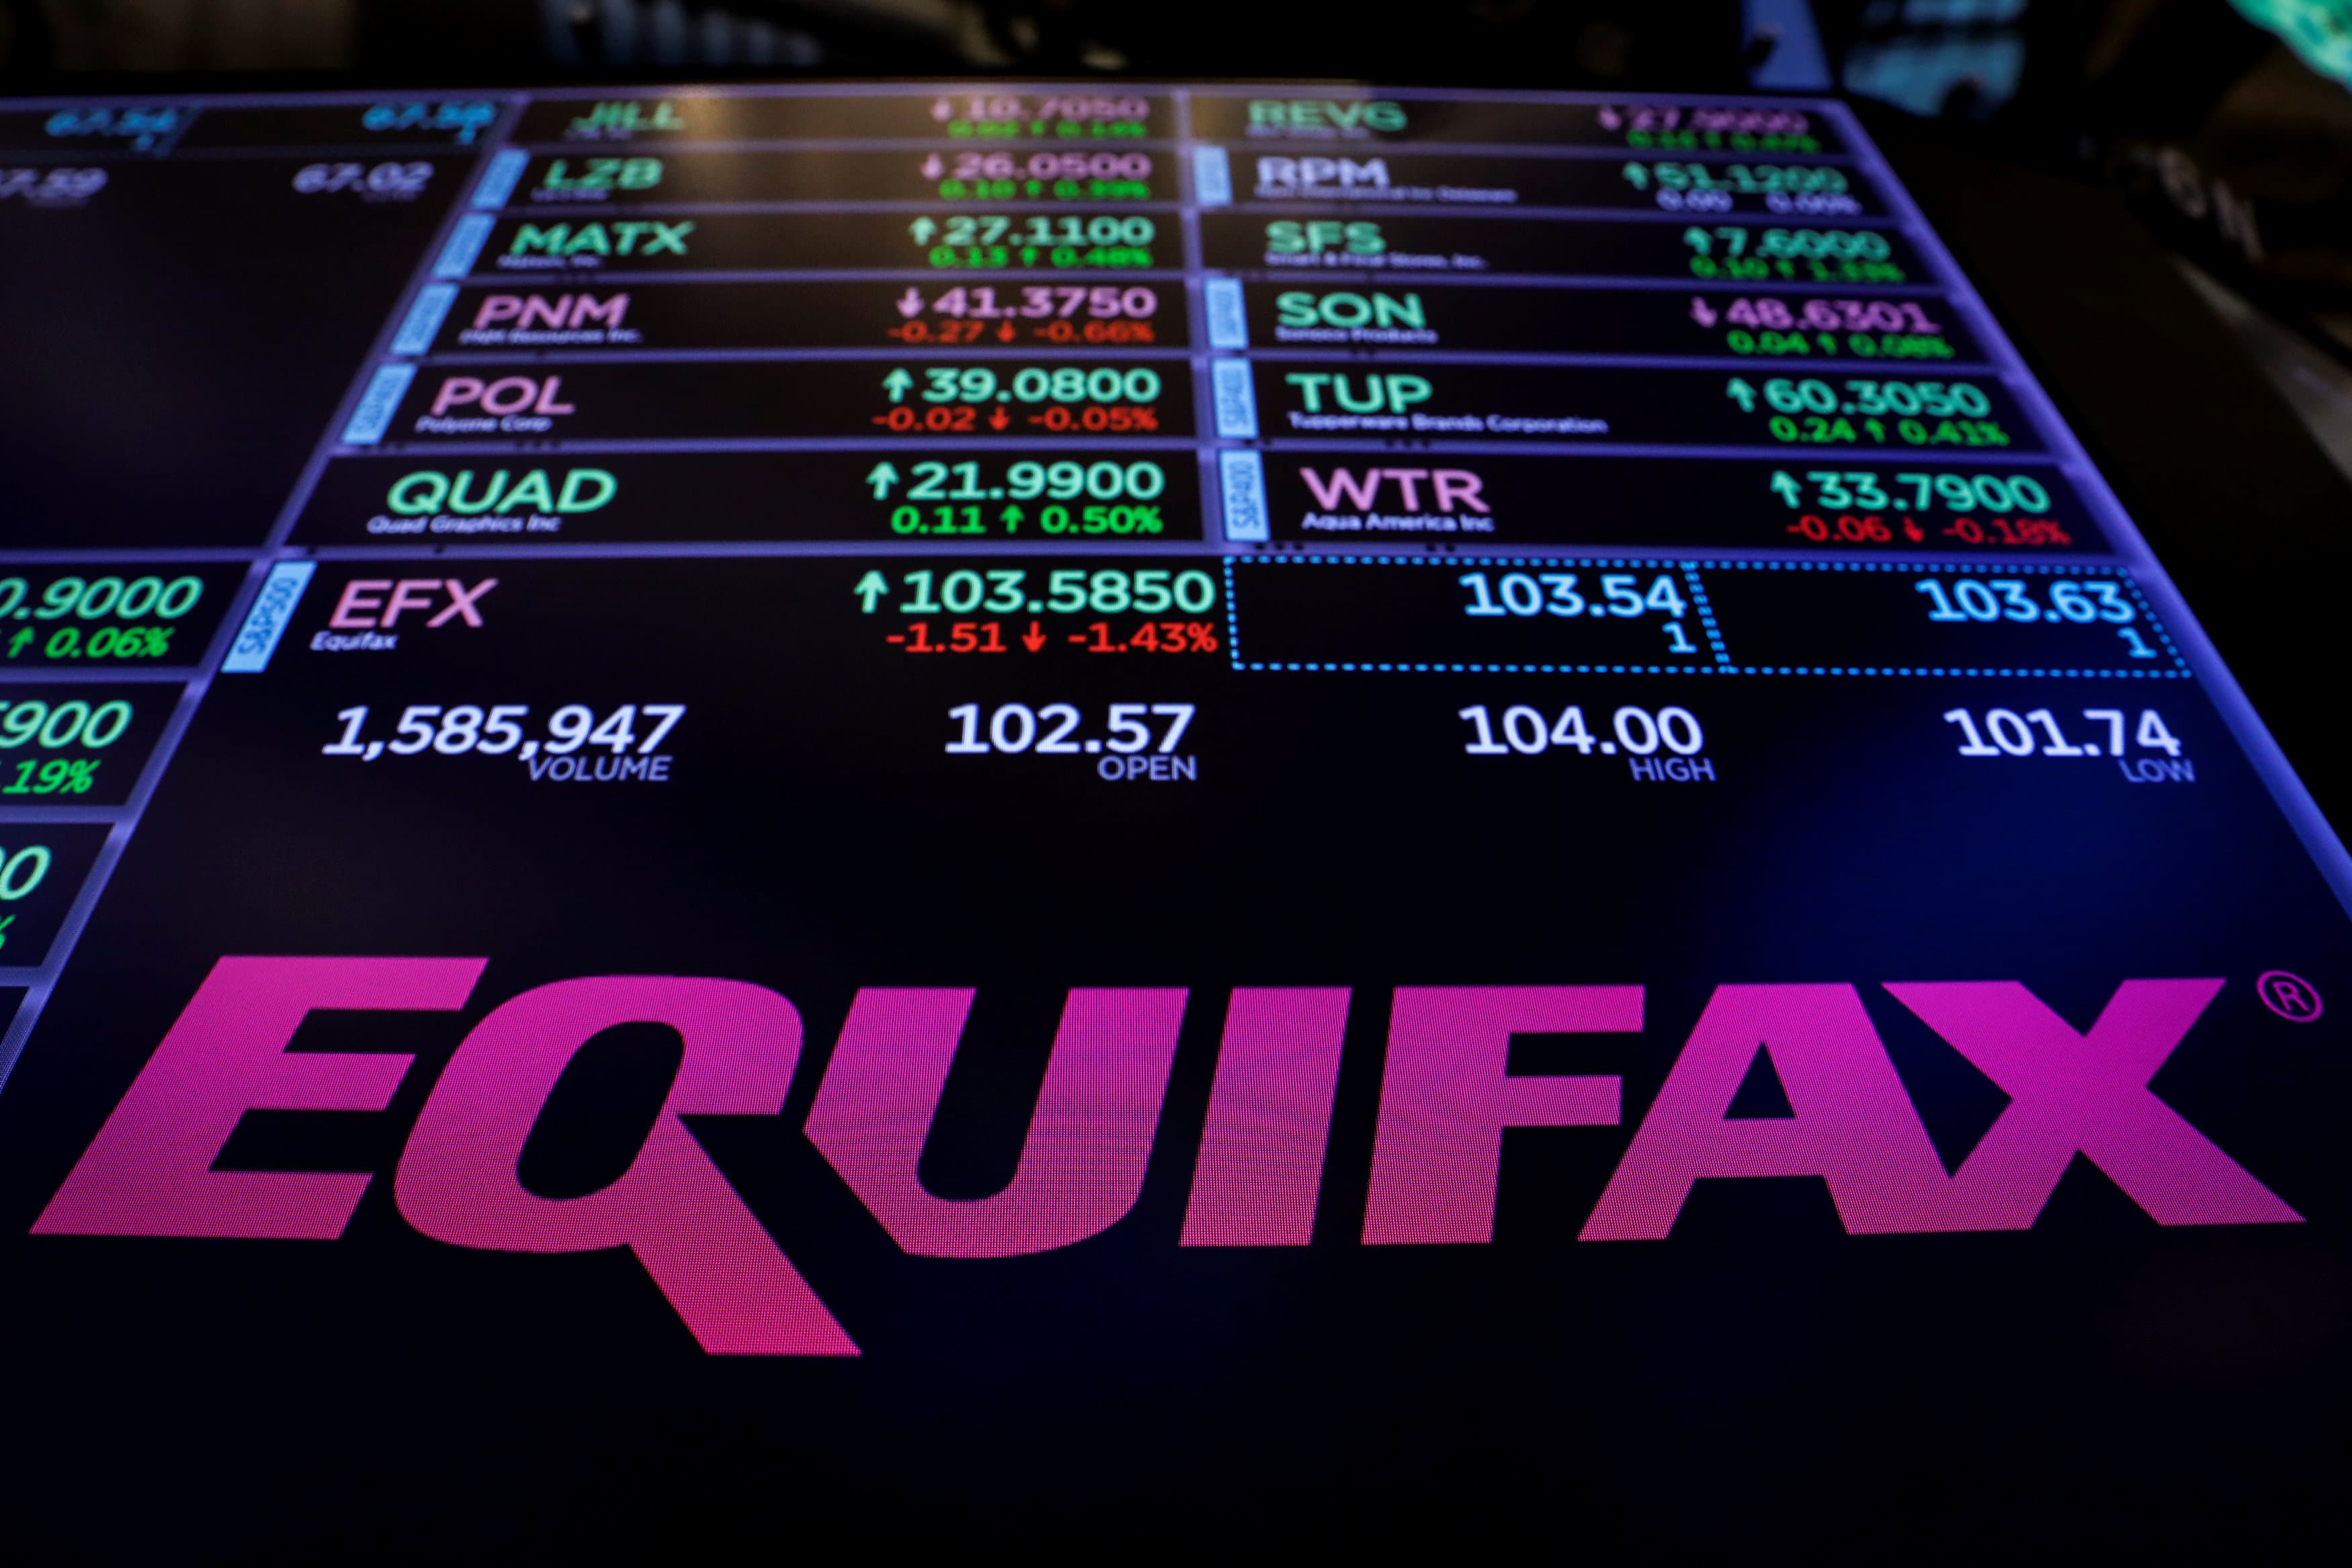 Equifax Stock Plunges 9% After Q1 Results